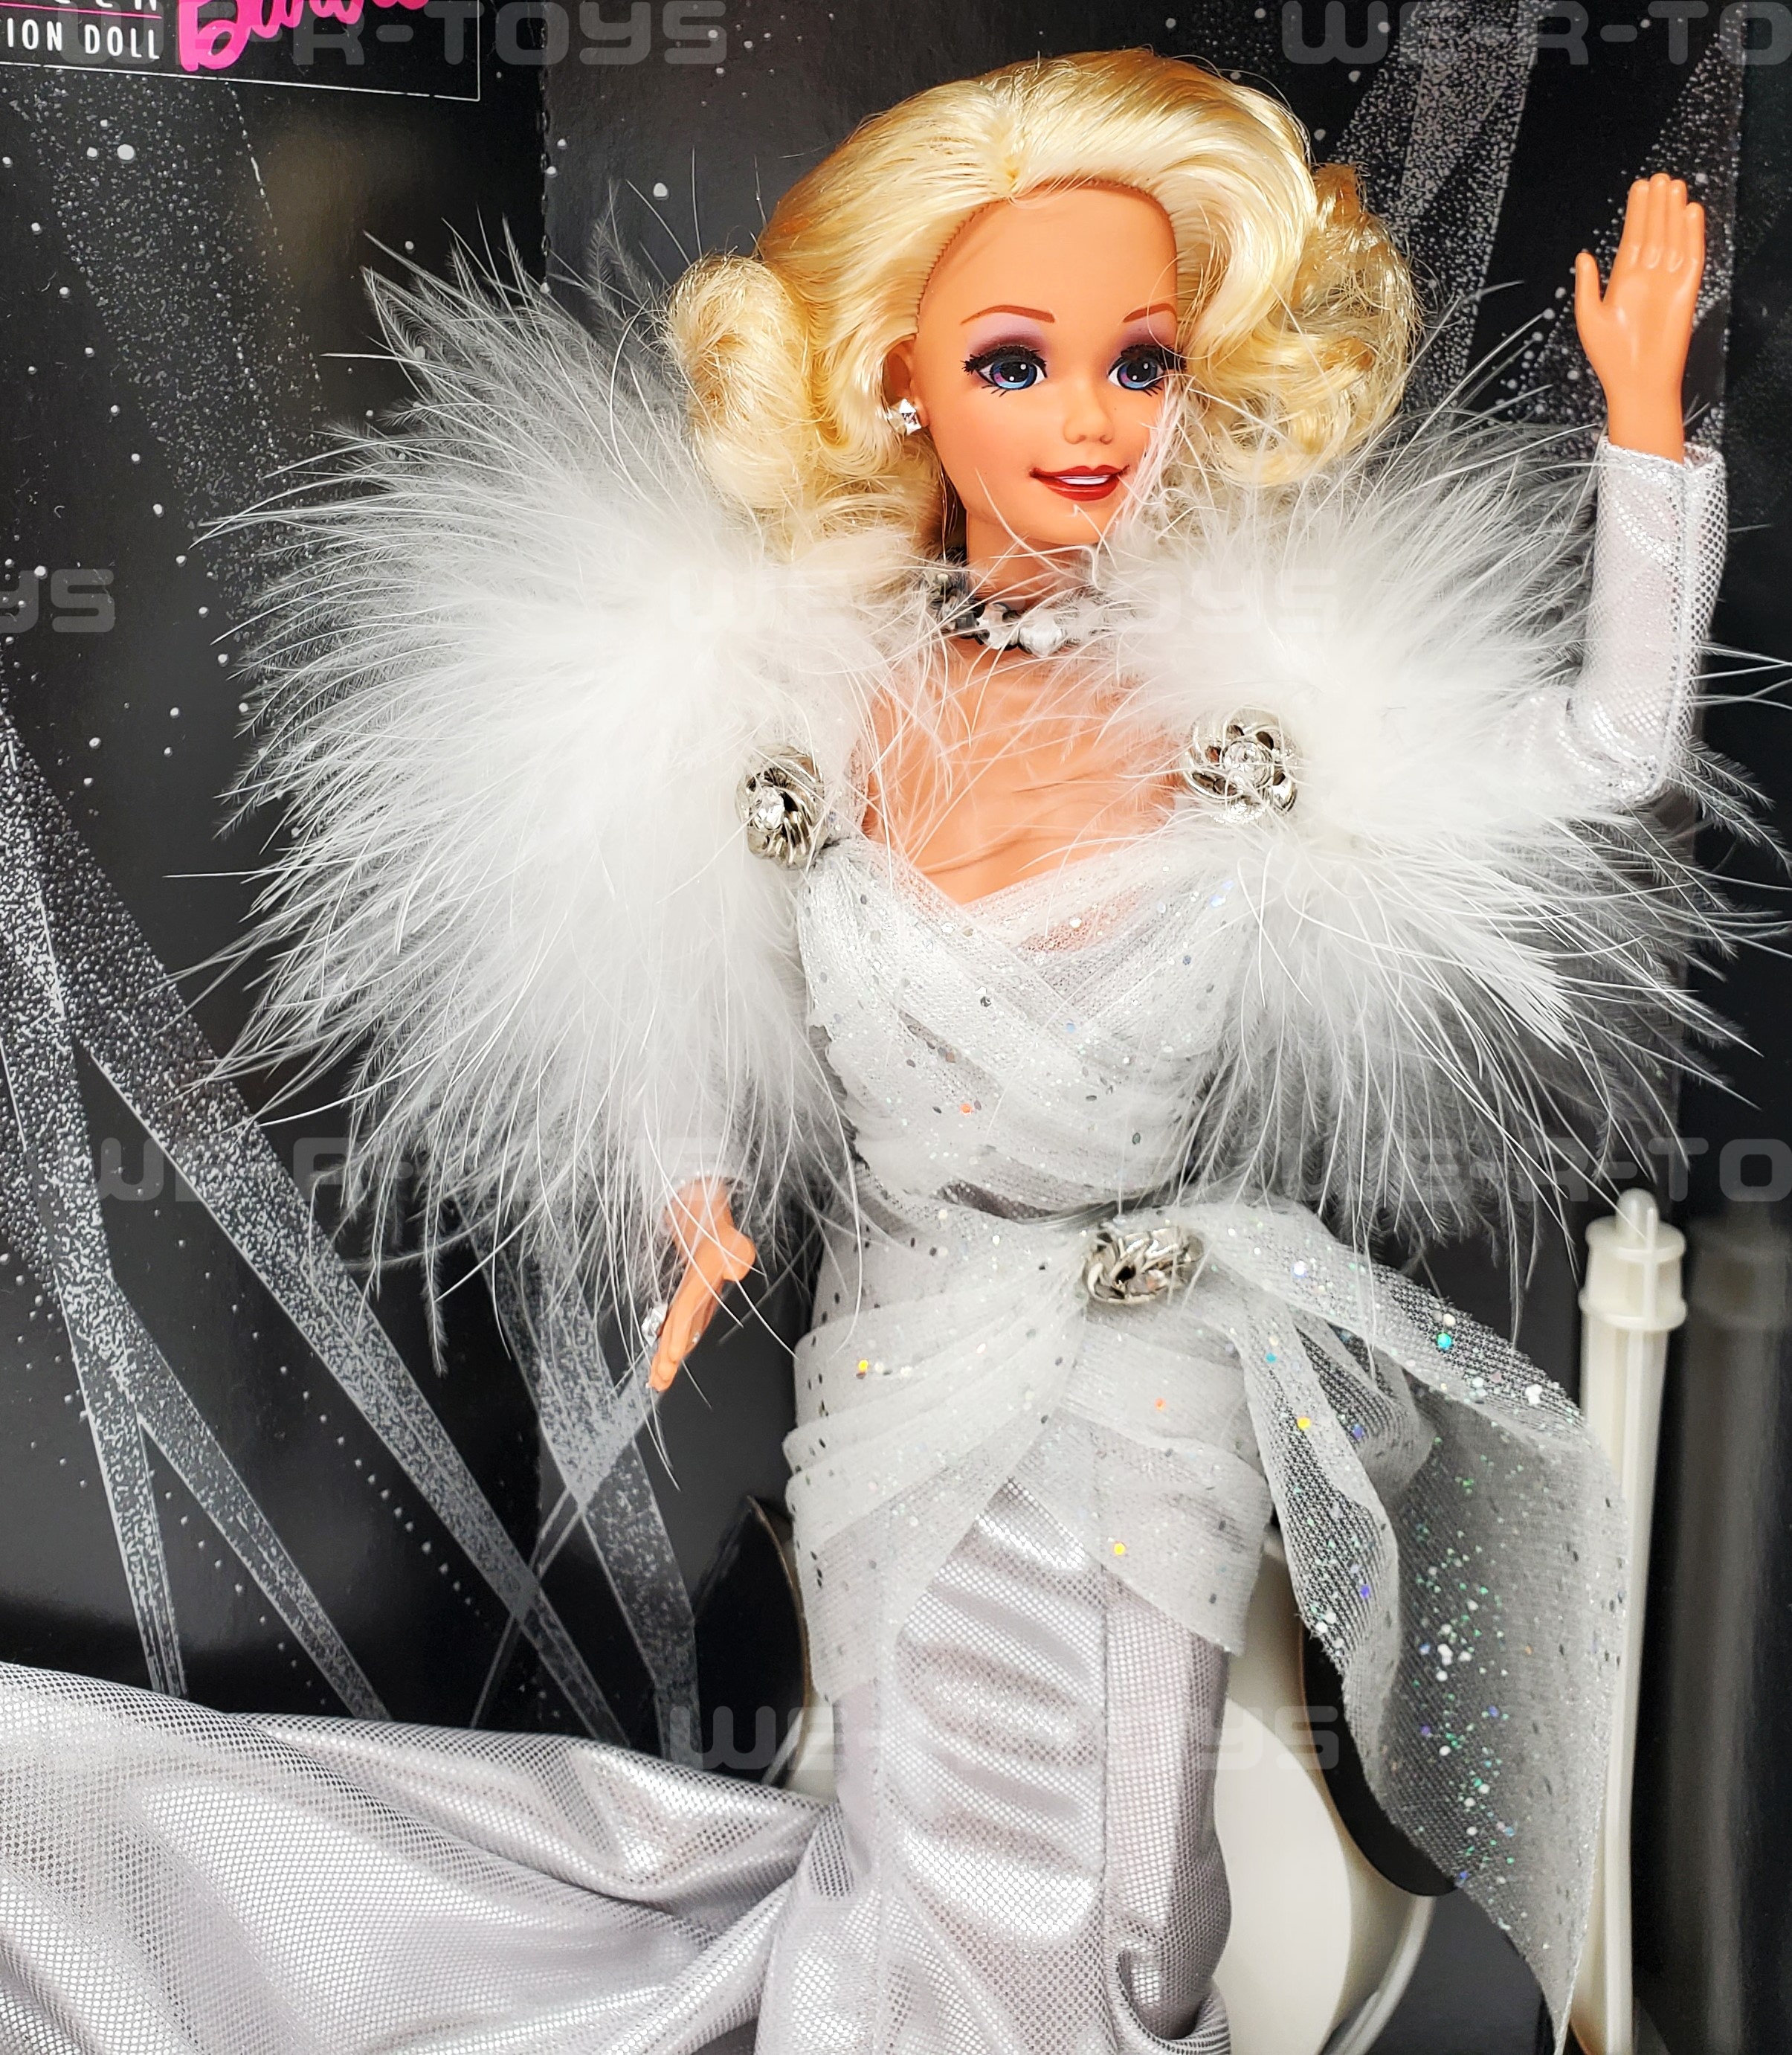 Silver Screen Barbie Doll FAO Schwarz Exclusive Special Limited Edition 1993 - image 5 of 6